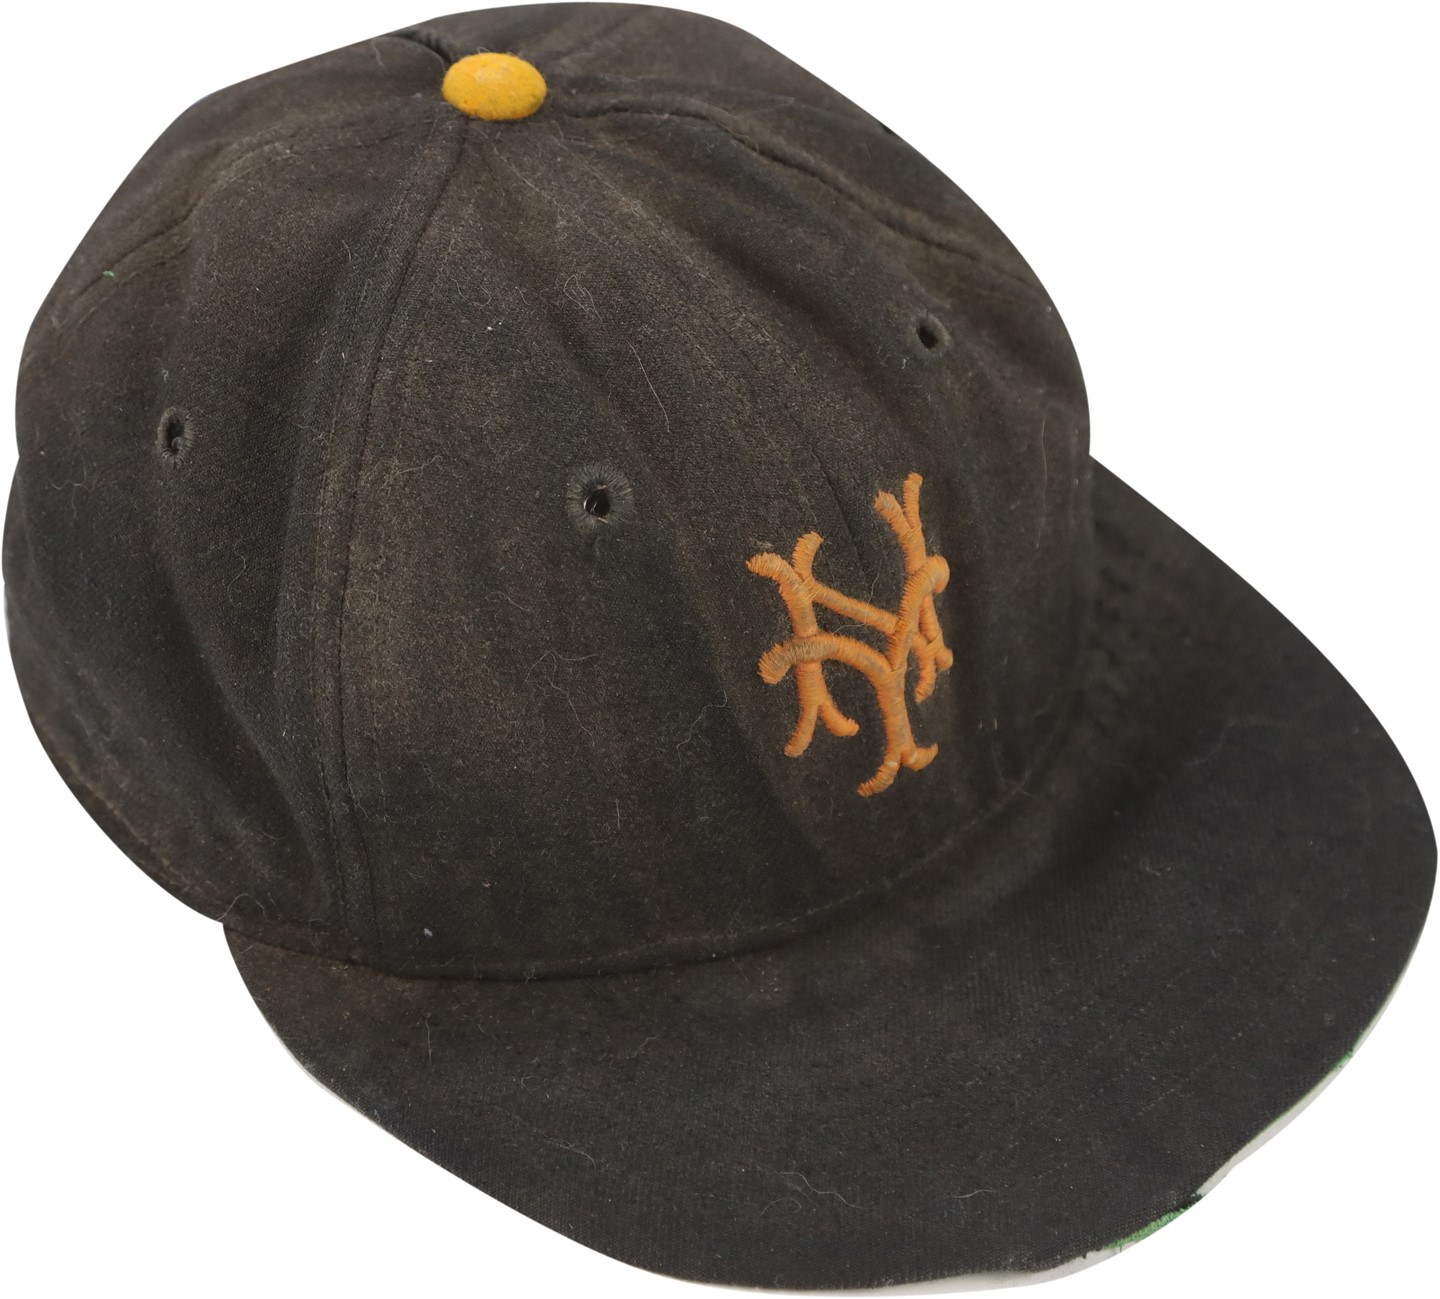 - Circa 1955 Willie Mays New York Giants Game Worn Hat with Provenance